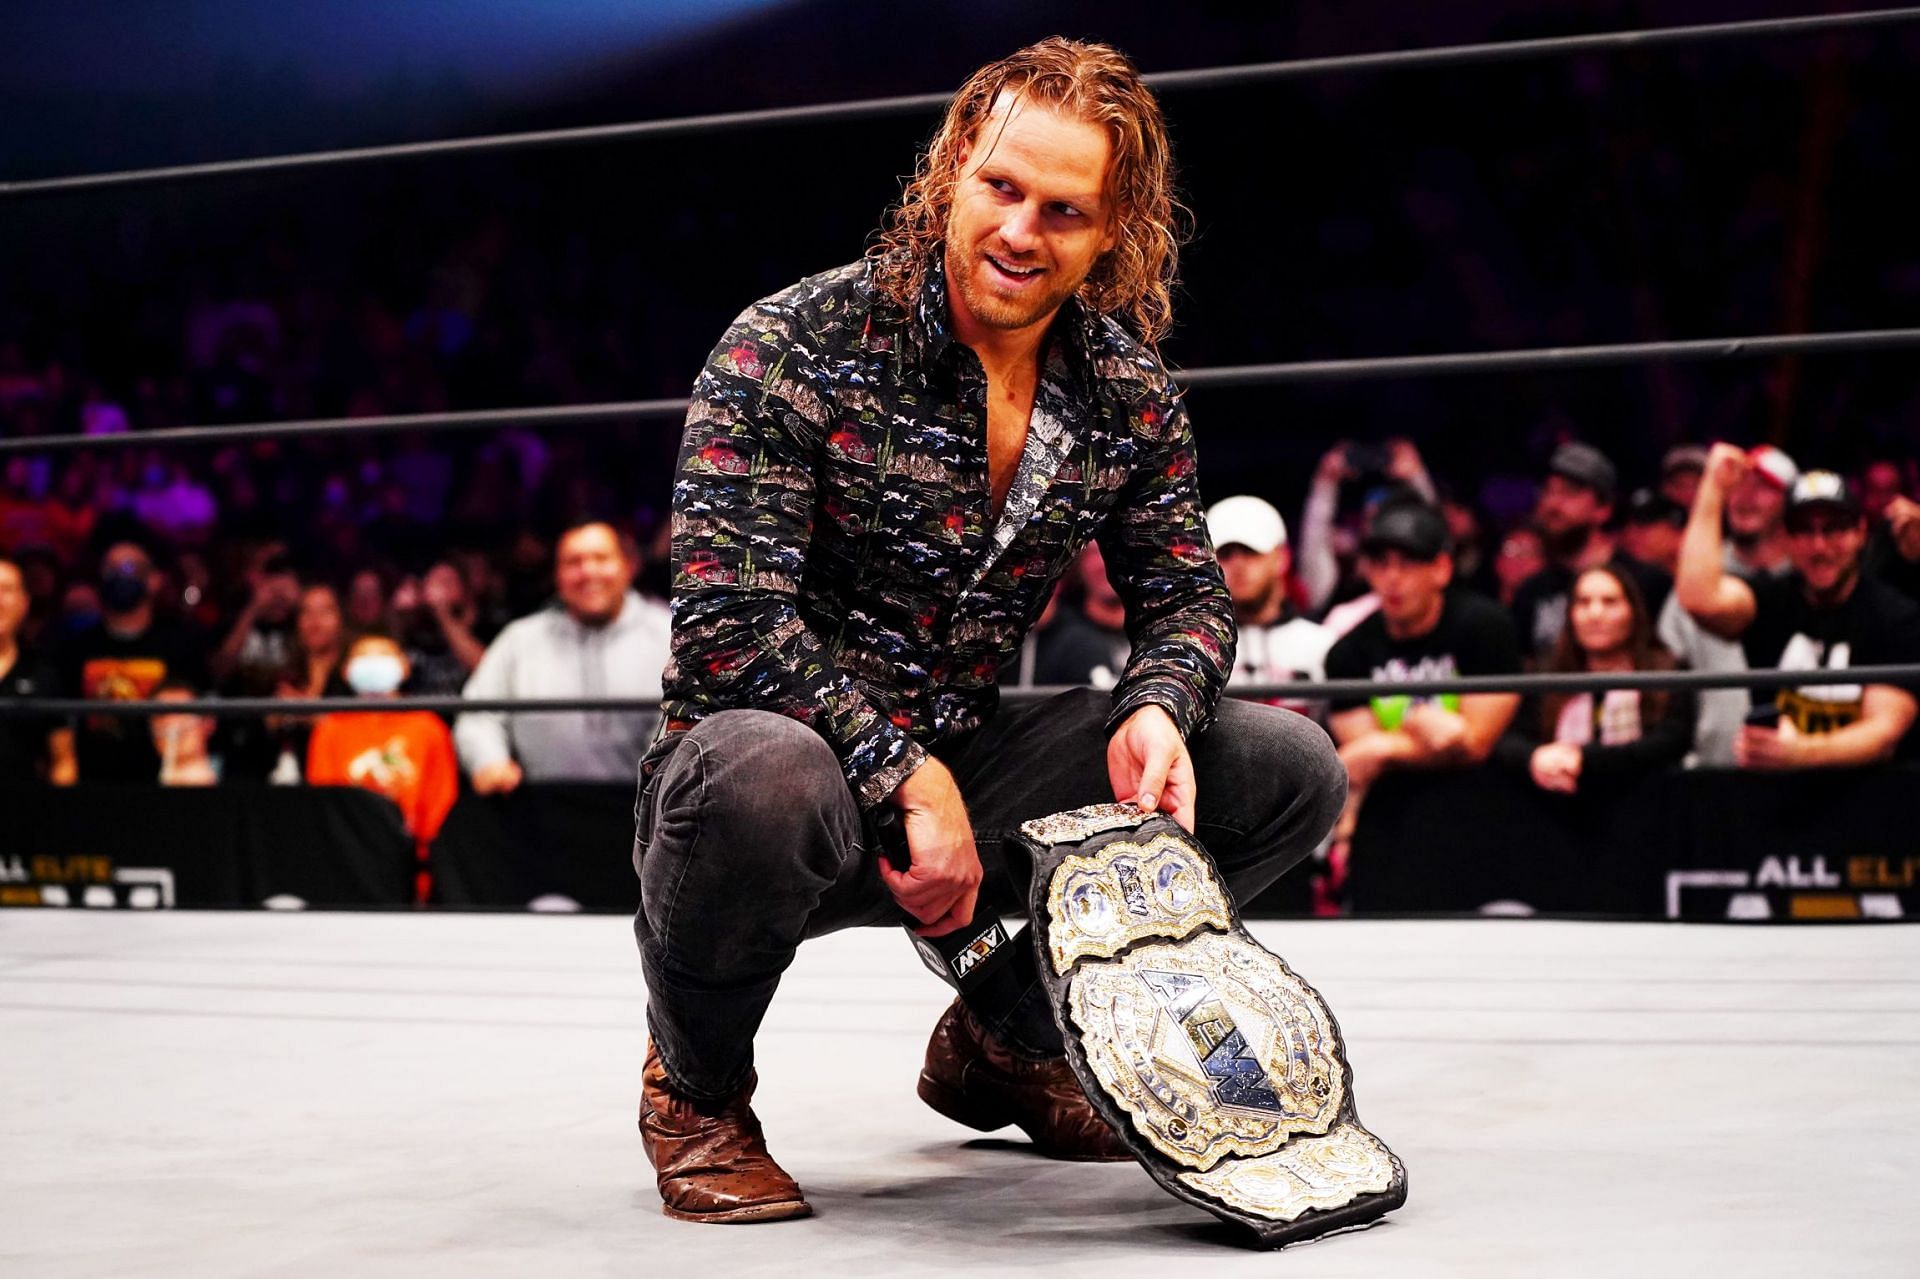 Page during the early days of his AEW Championship reign.